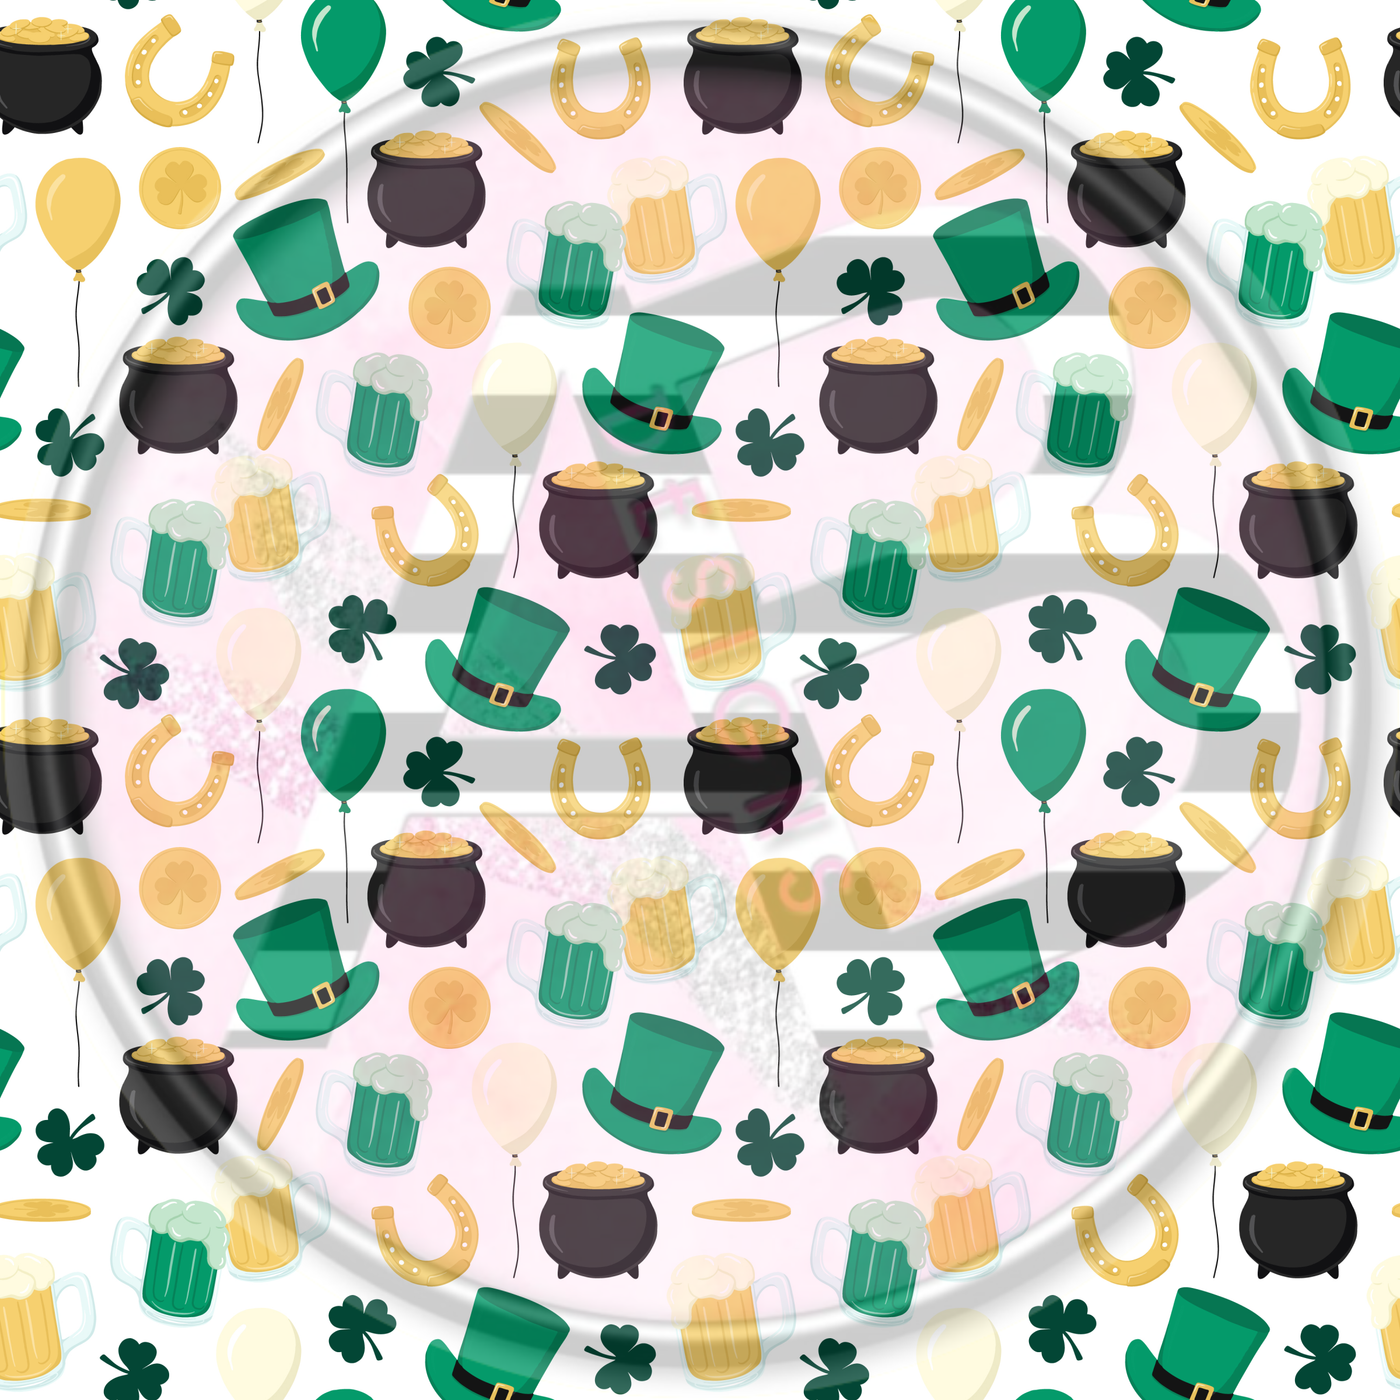 Adhesive Patterned Vinyl - St. Patrick's Day 25